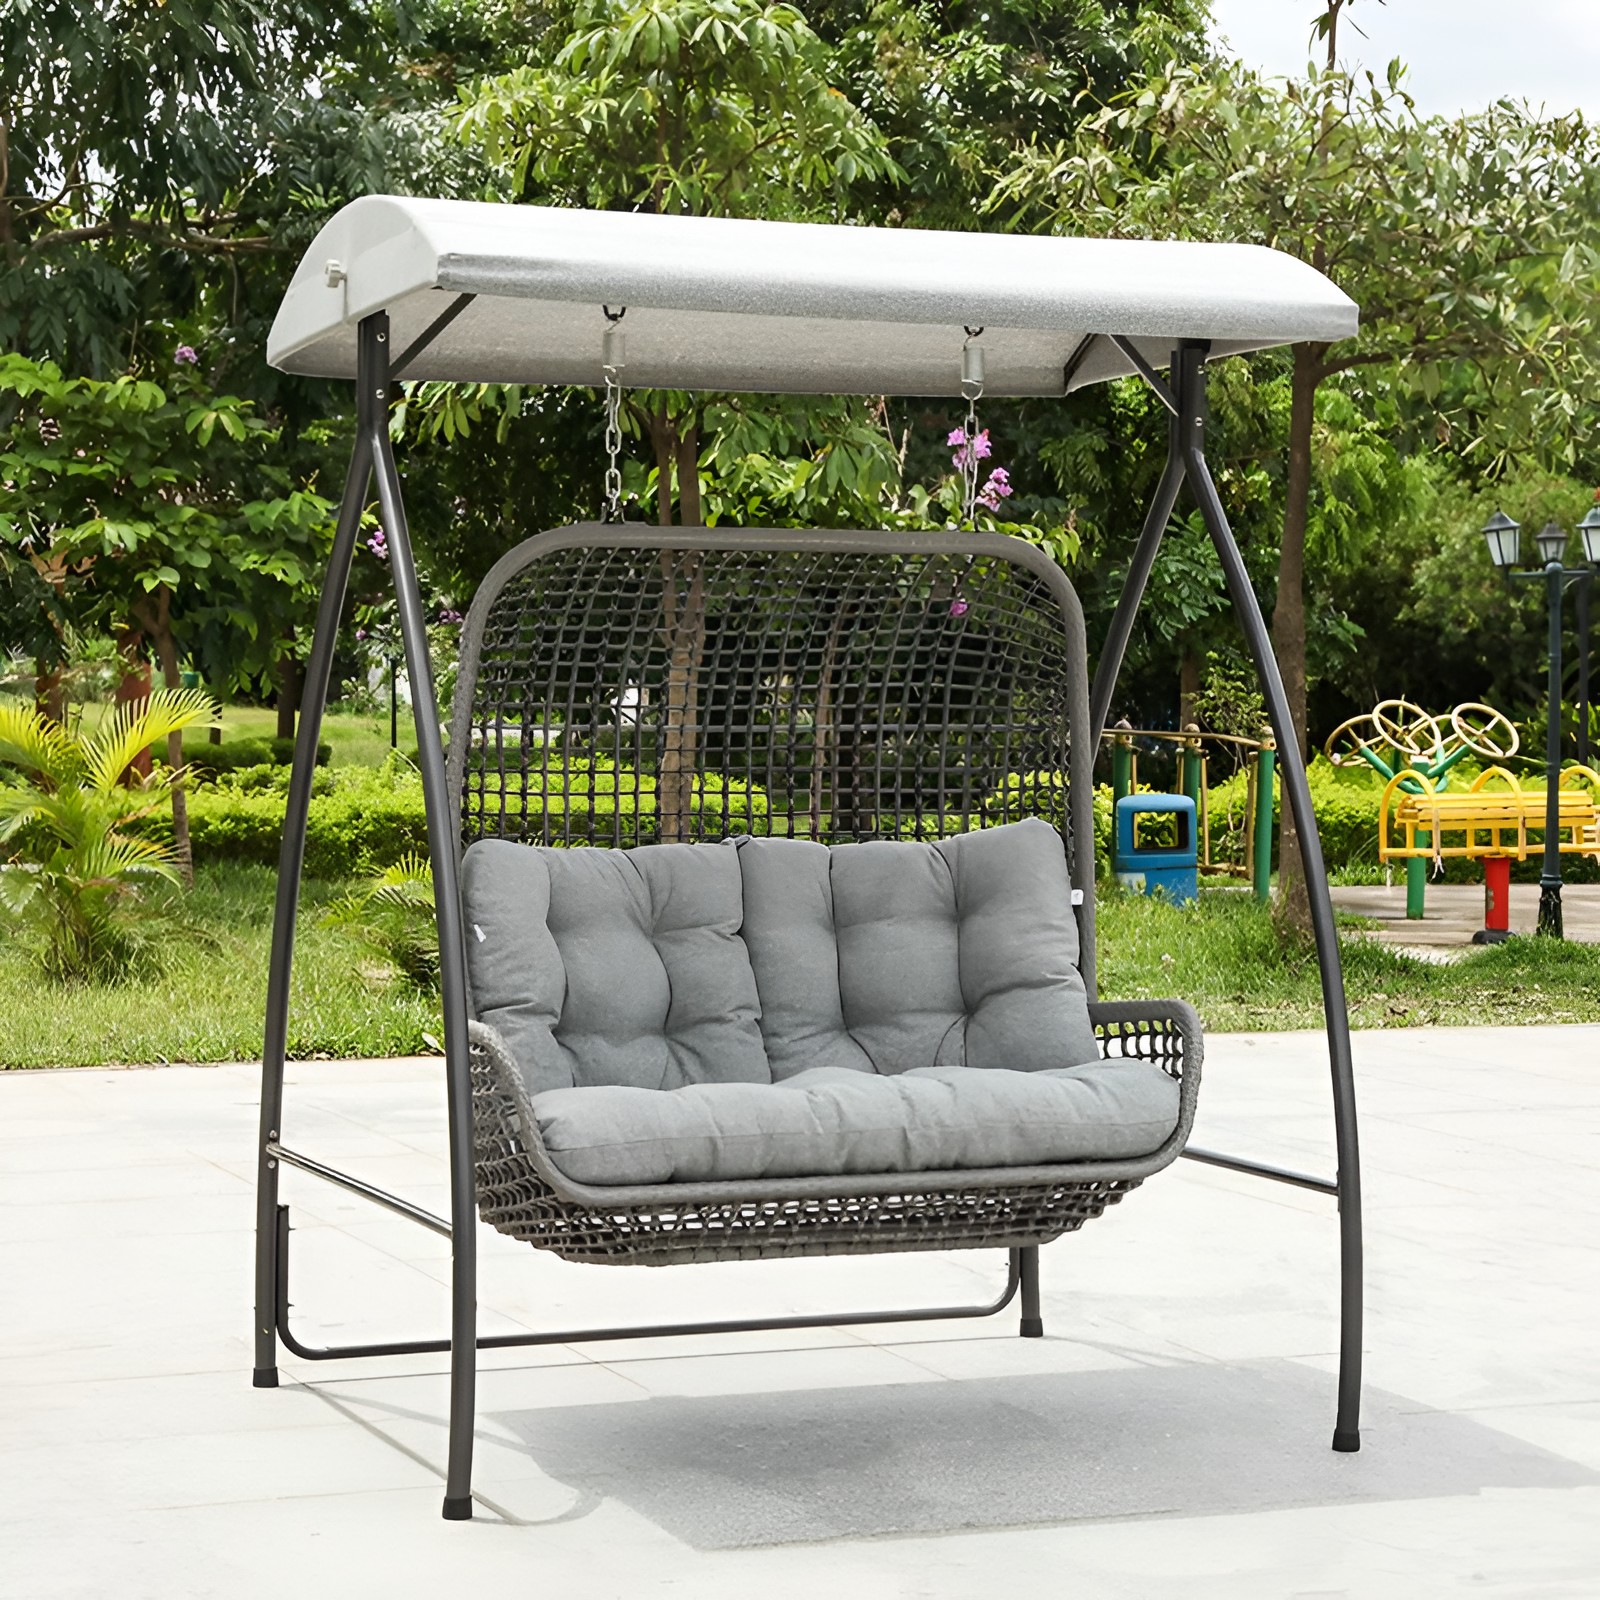 D006 Rattan Wicker Double Seat Outdoor Garden Swing Chair with Canopy